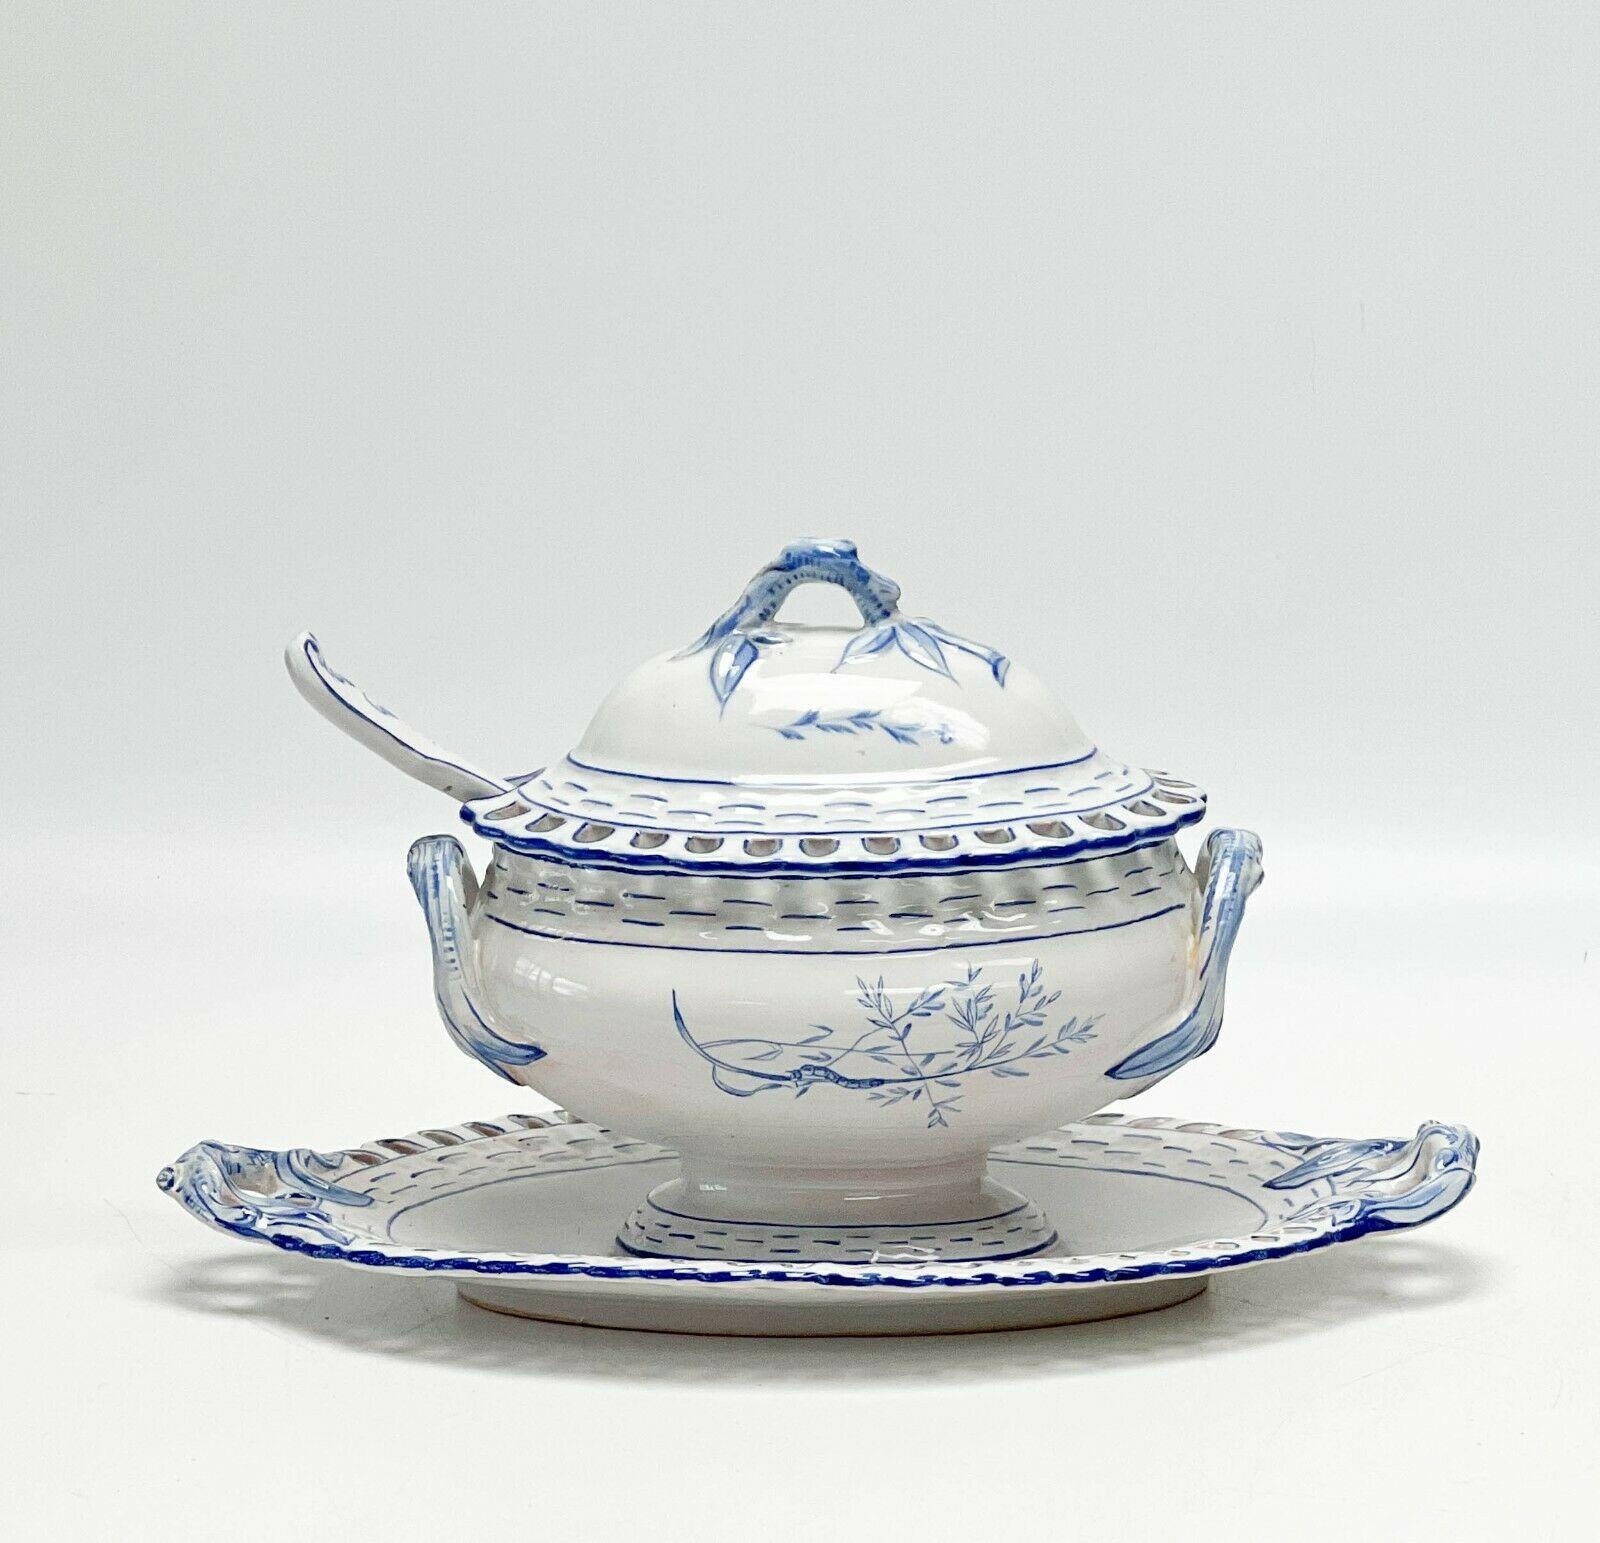 Galle Faience France Reticulated Porcelain Lidded Sauce Tureen with Assoc Spoon

circa 1880. A white ground with blue accents, floral and insect decoration. A reticulated rim, with associated slotted spoon. Underside with Galle marks.